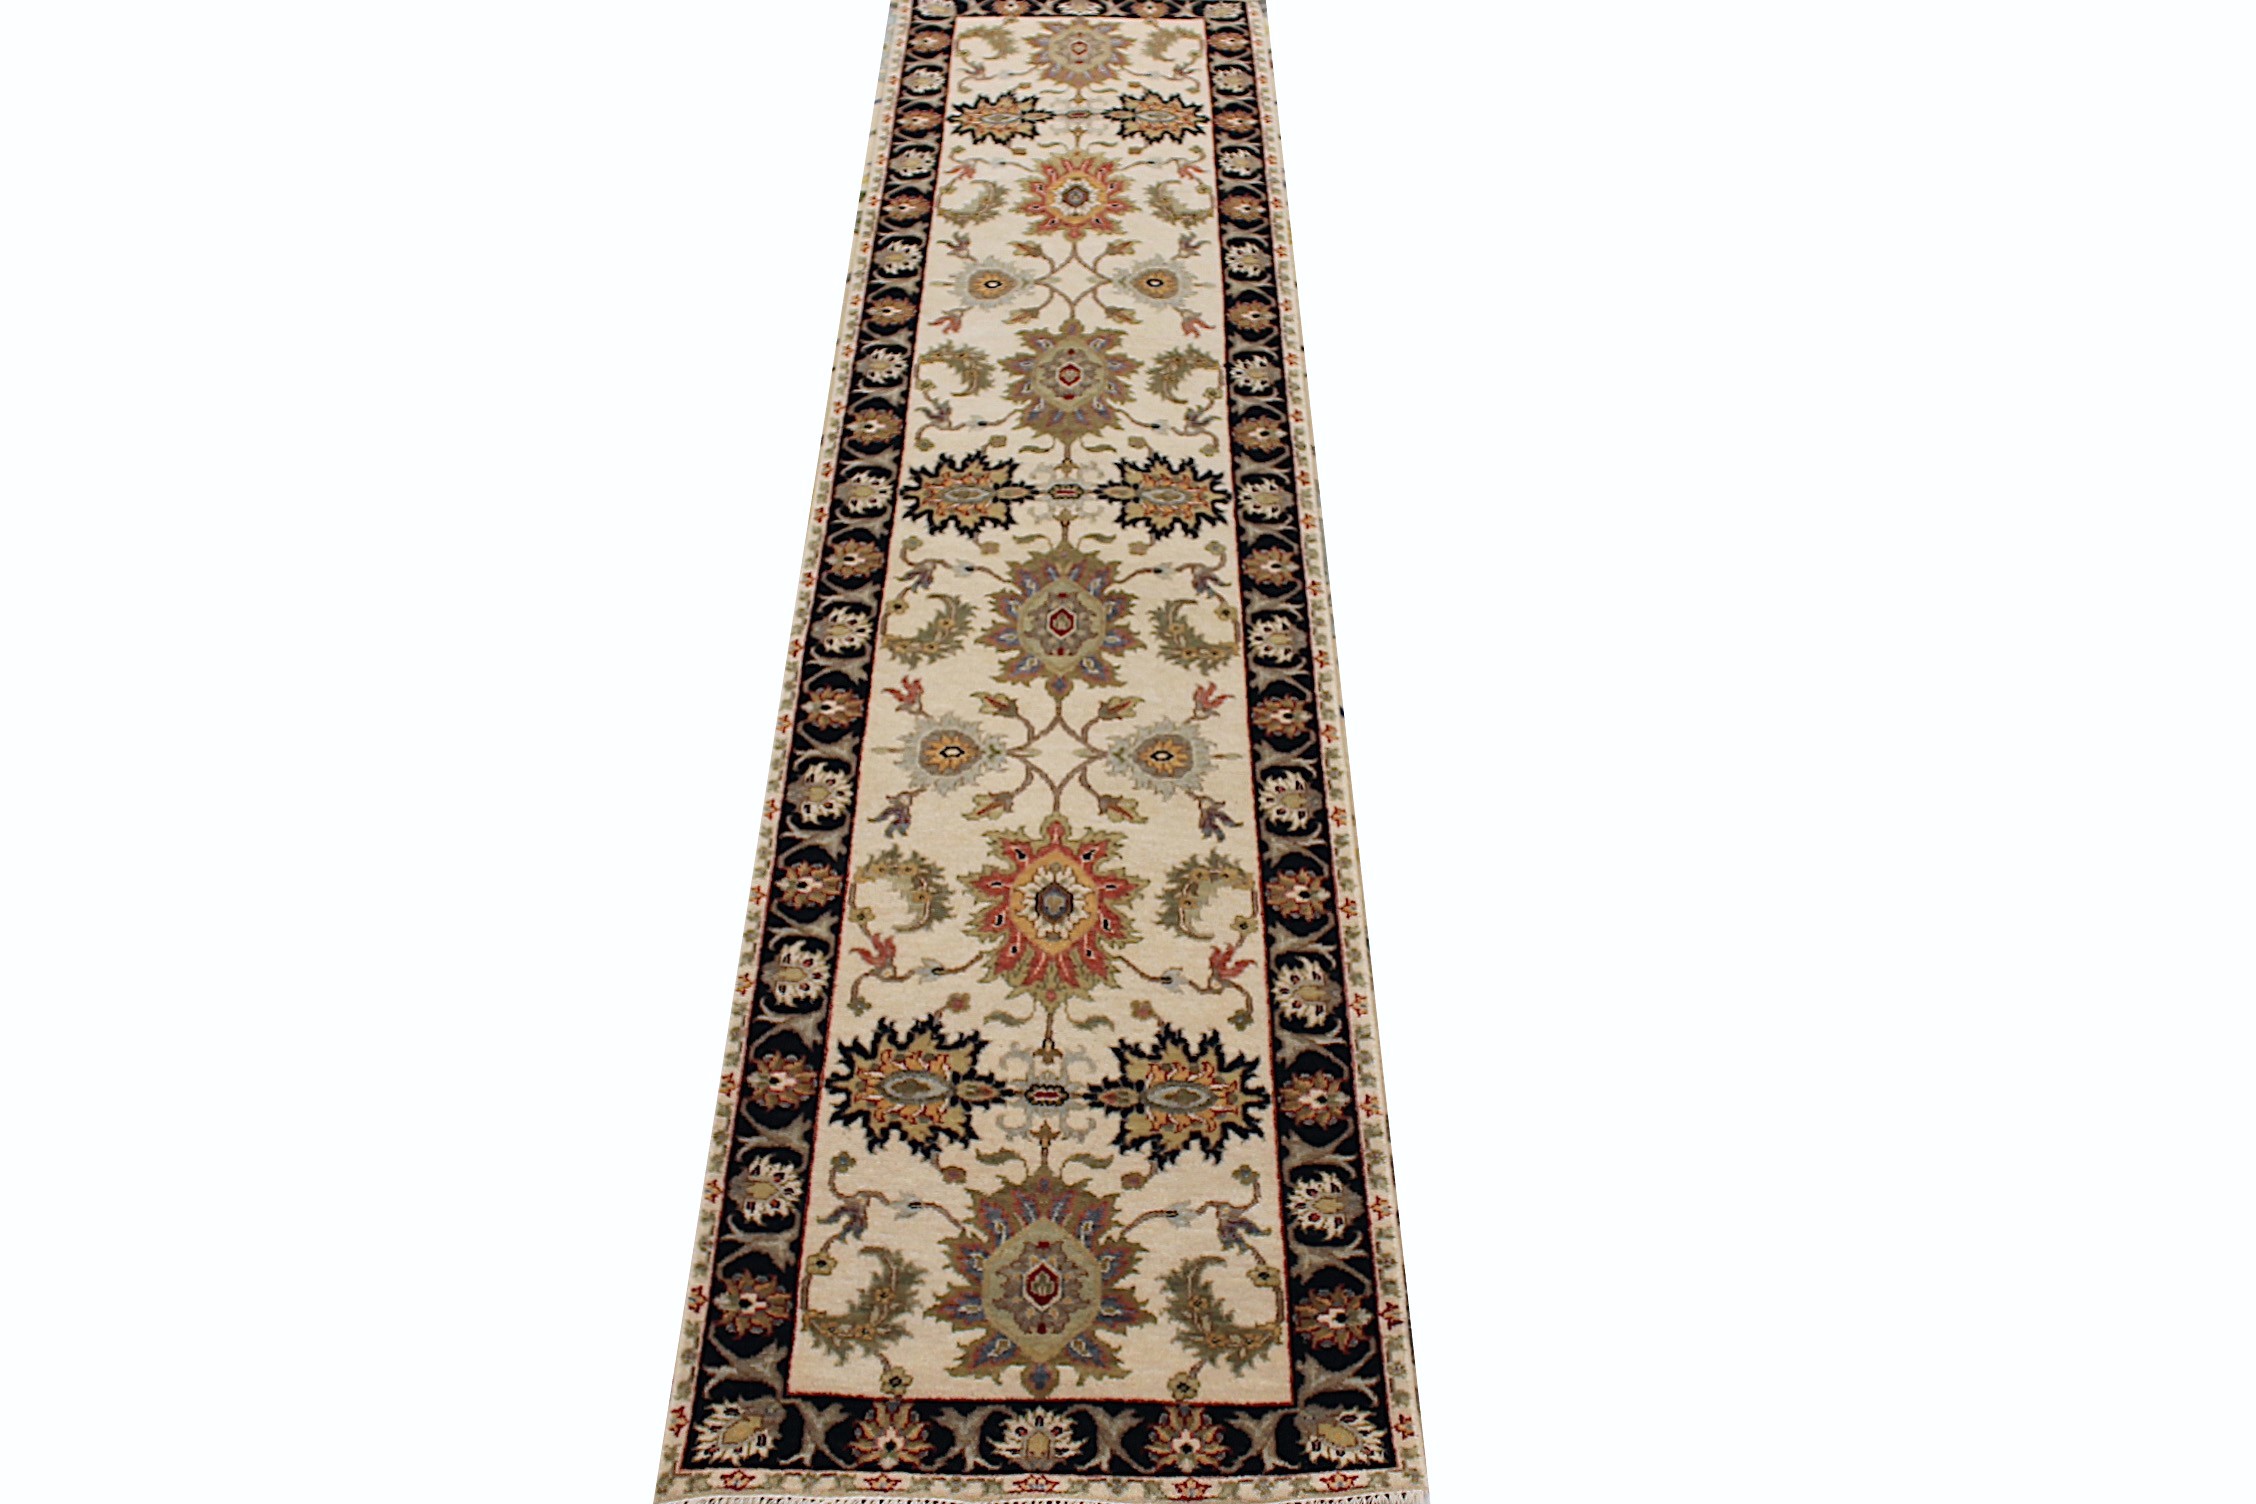 10 ft. Runner Oriental Hand Knotted Wool Area Rug - MR027599